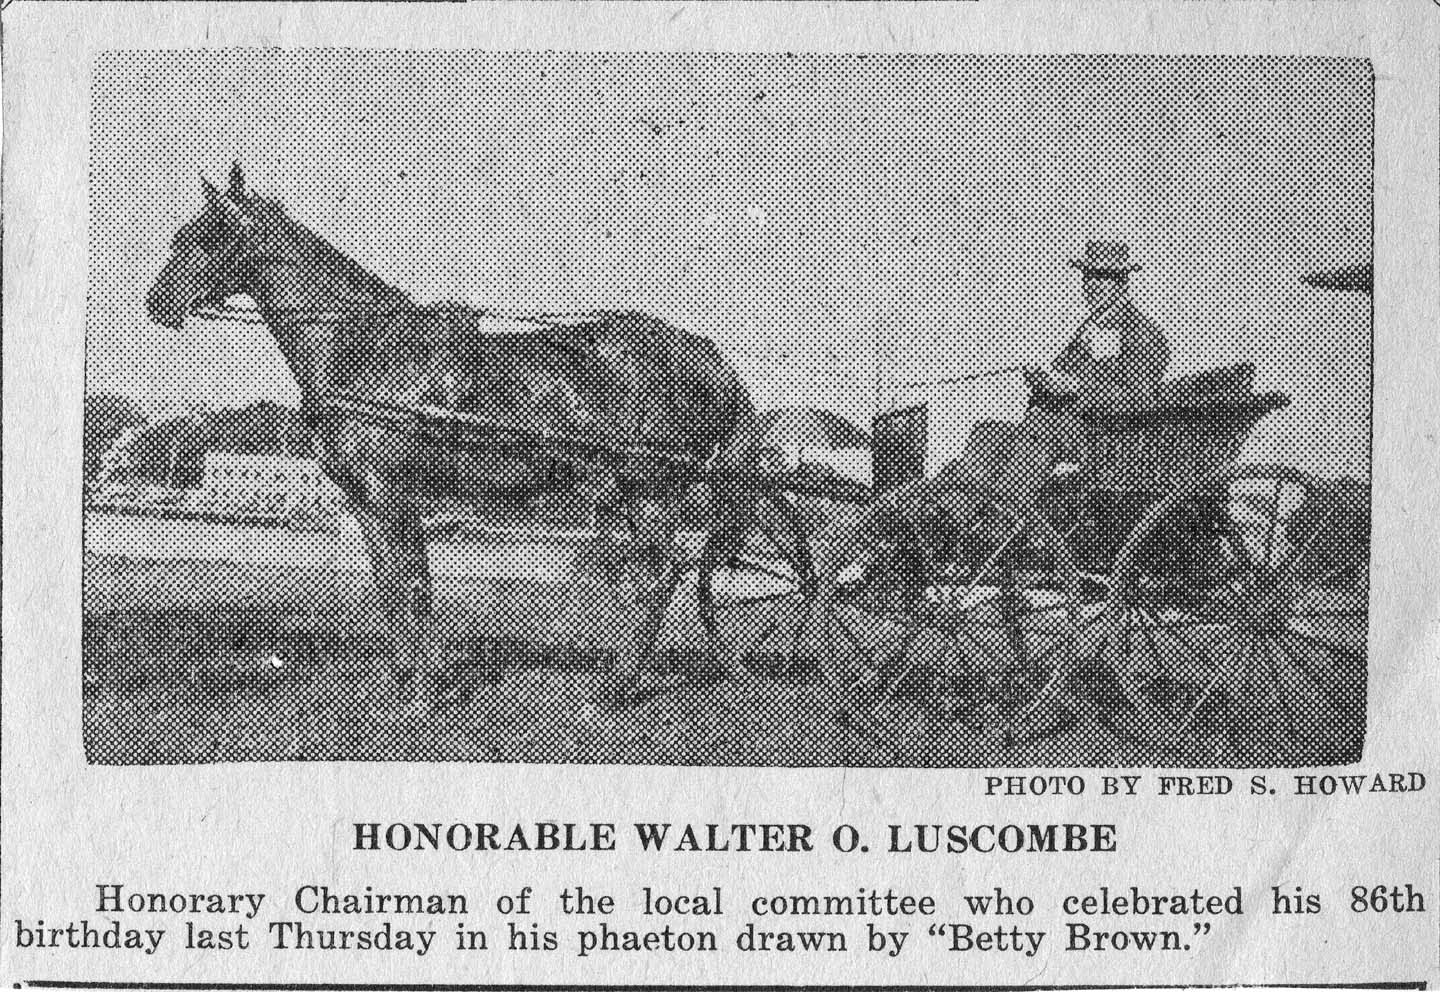 Luscombe in a carriage